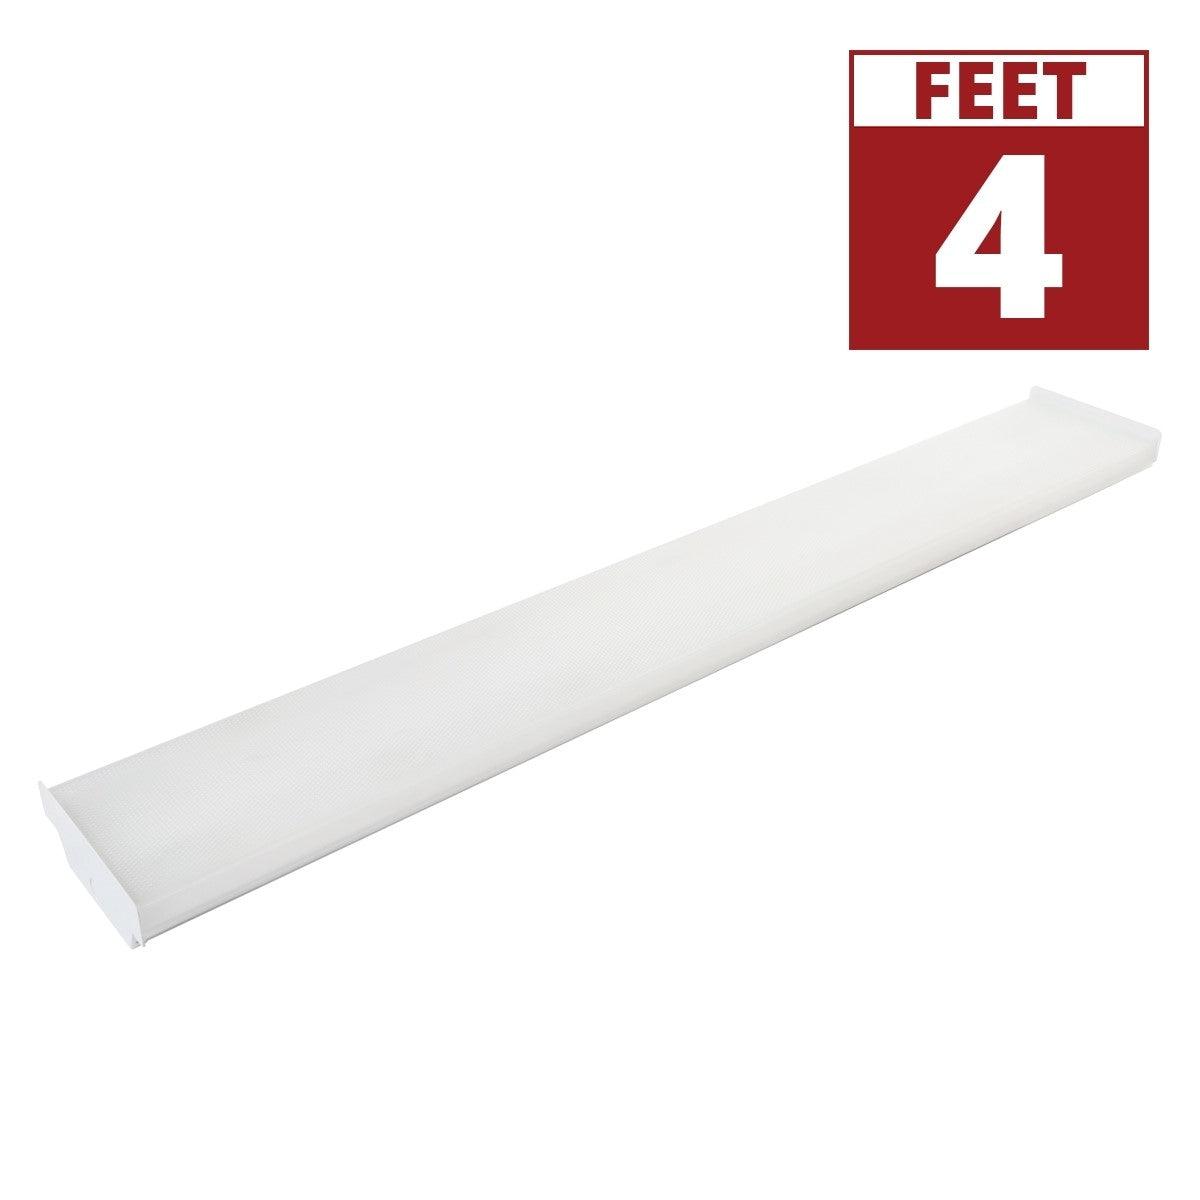 4ft LED Ready Wrap Fixture 2-lamp Single End Wiring LED T8 Bulbs Not Included - Bees Lighting